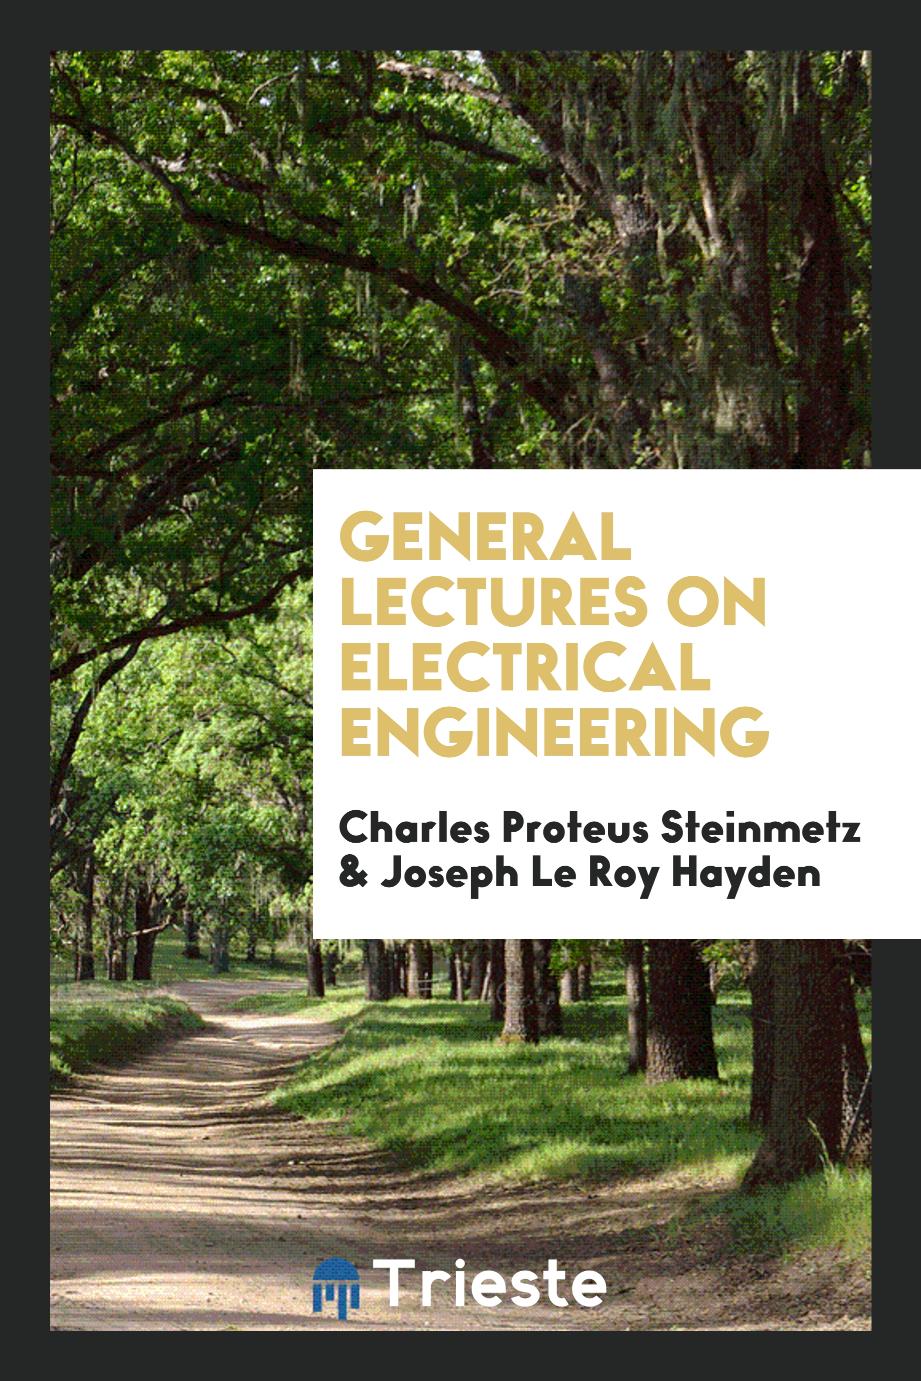 General lectures on electrical engineering